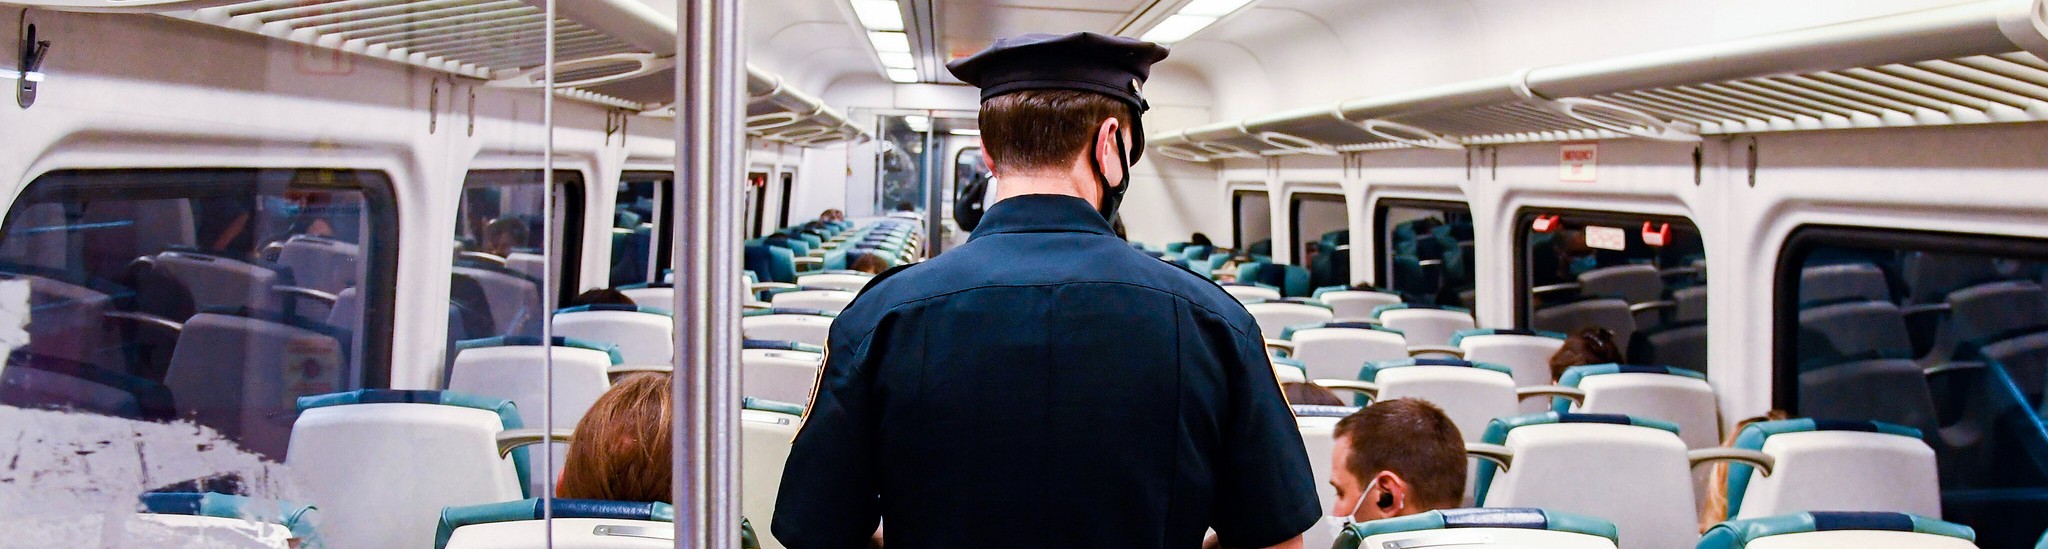 A police officer on a train.